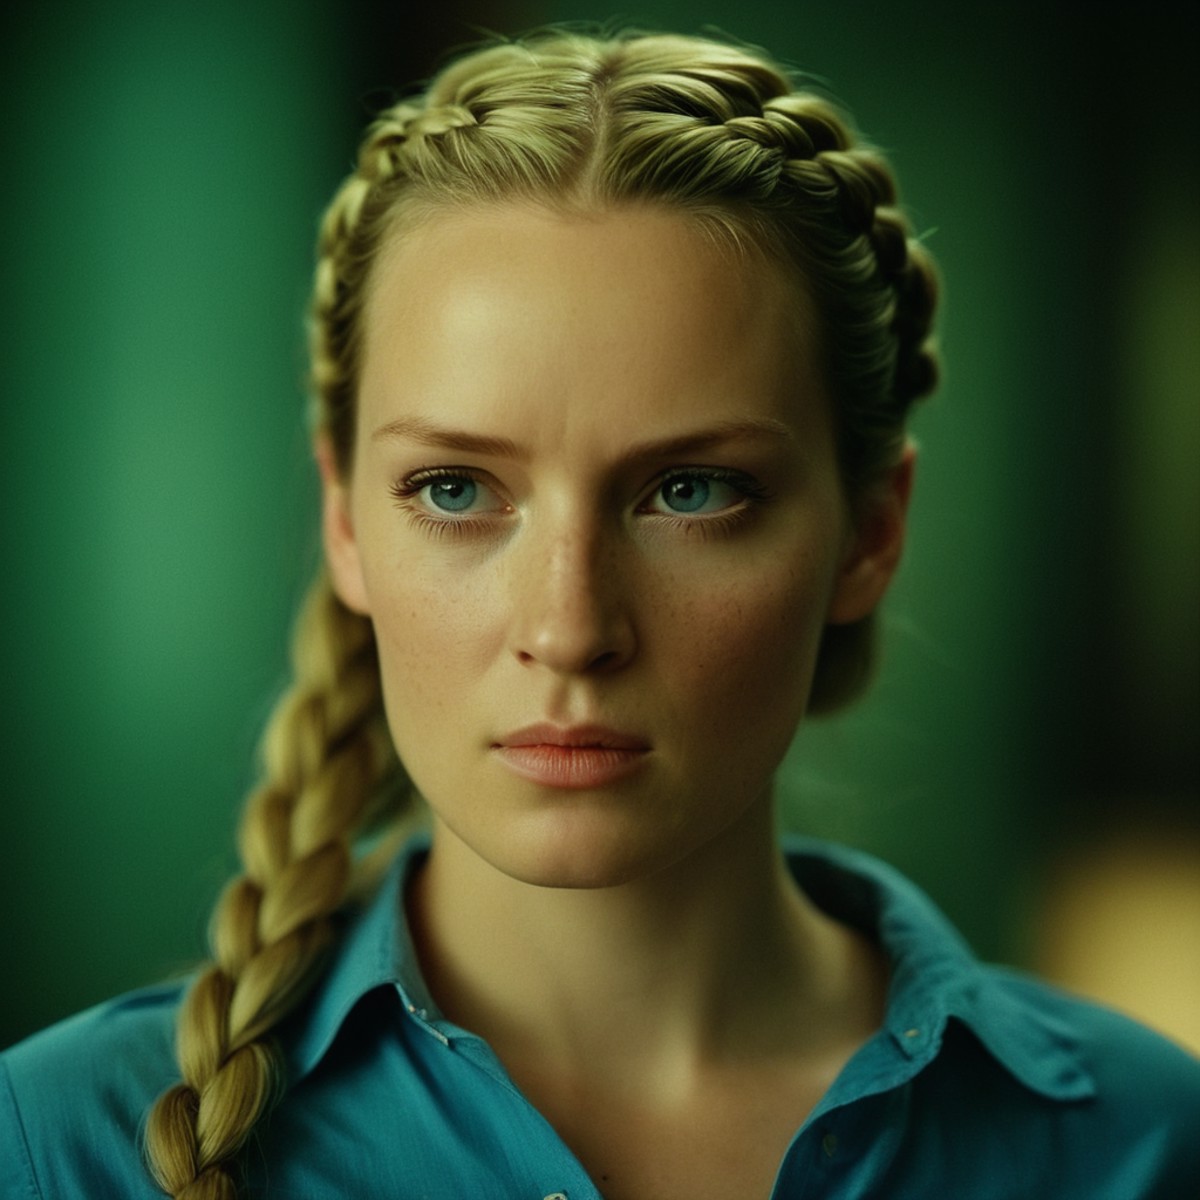 cinematic film still of  <lora:Kill Bill style:1>
Cinematic film image of The Blonde a woman with a braid in a blue shirt,...